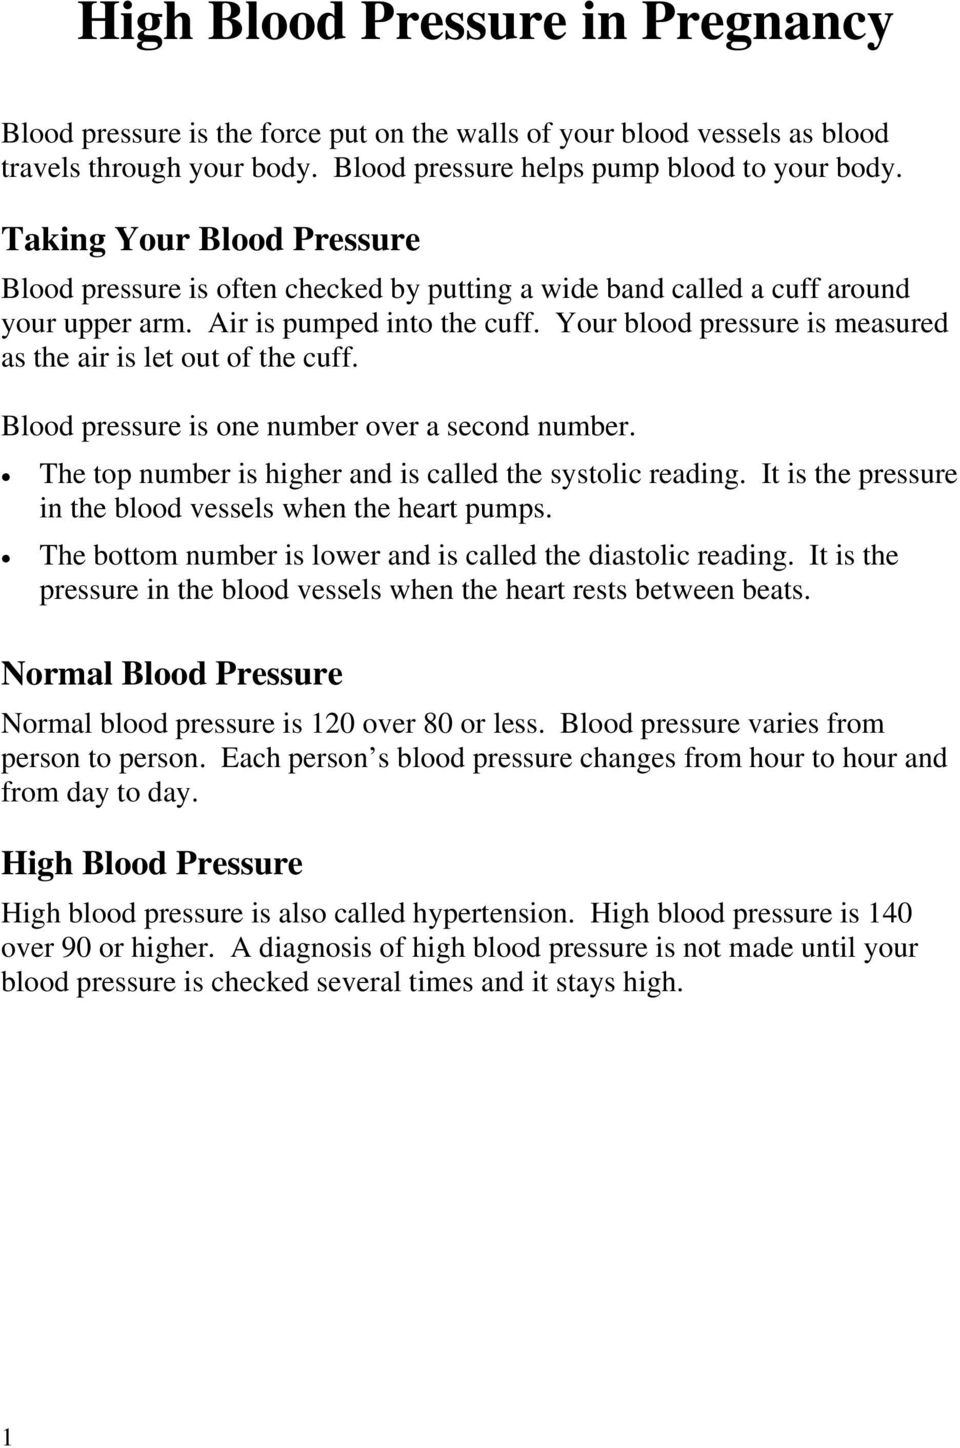 Your blood pressure is measured as the air is let out of the cuff. Blood pressure is one number over a second number. The top number is higher and is called the systolic reading.